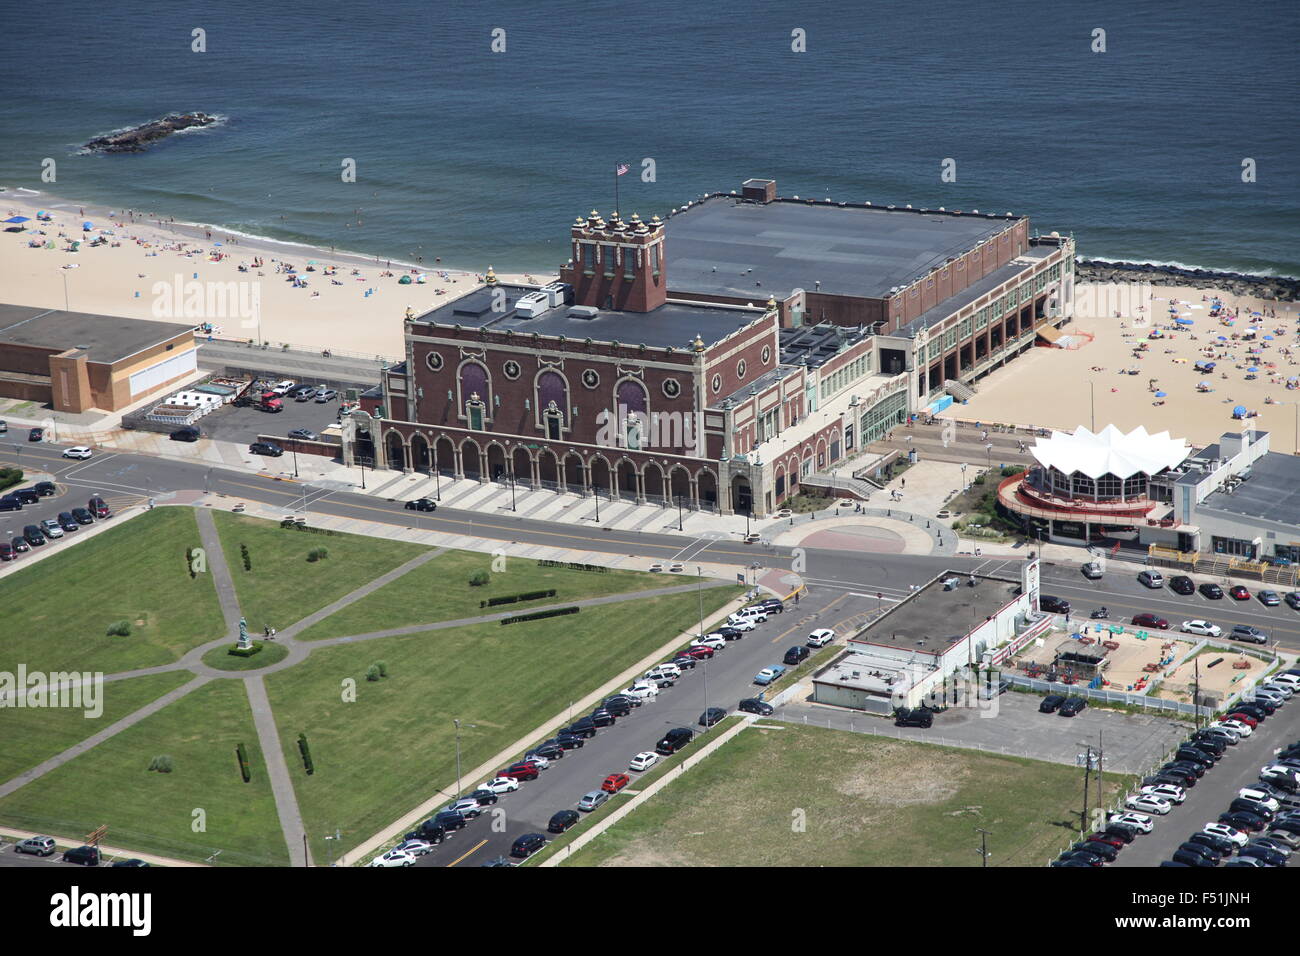 Asbury Park New Jersey 1978 a9 Photo of Boardwalk and Convention Hall 